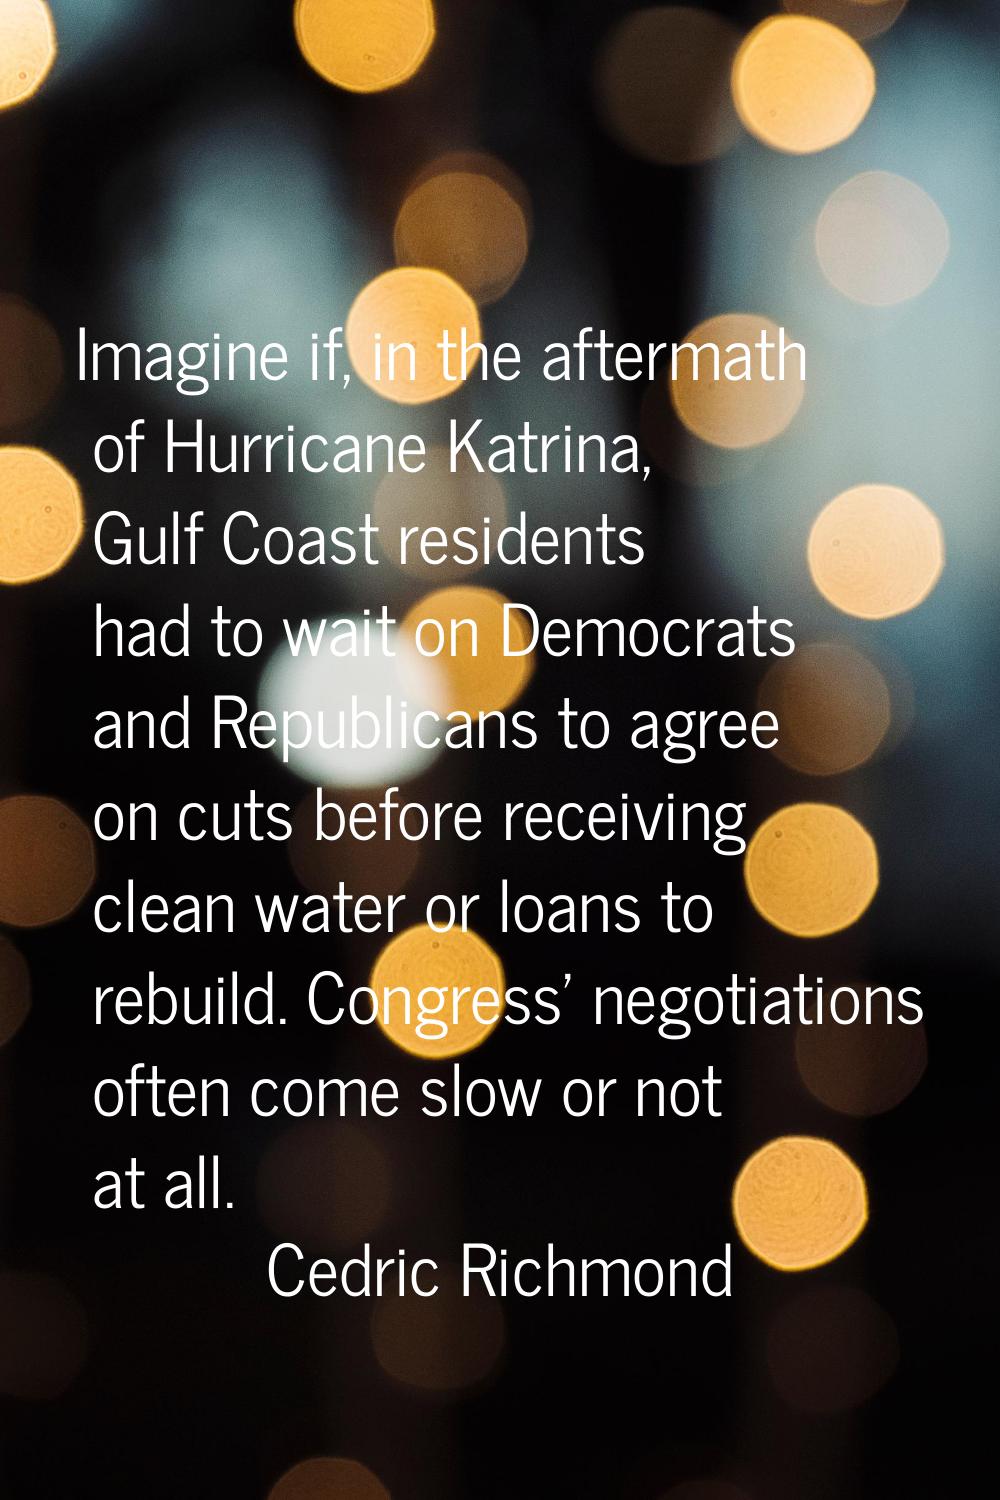 Imagine if, in the aftermath of Hurricane Katrina, Gulf Coast residents had to wait on Democrats an